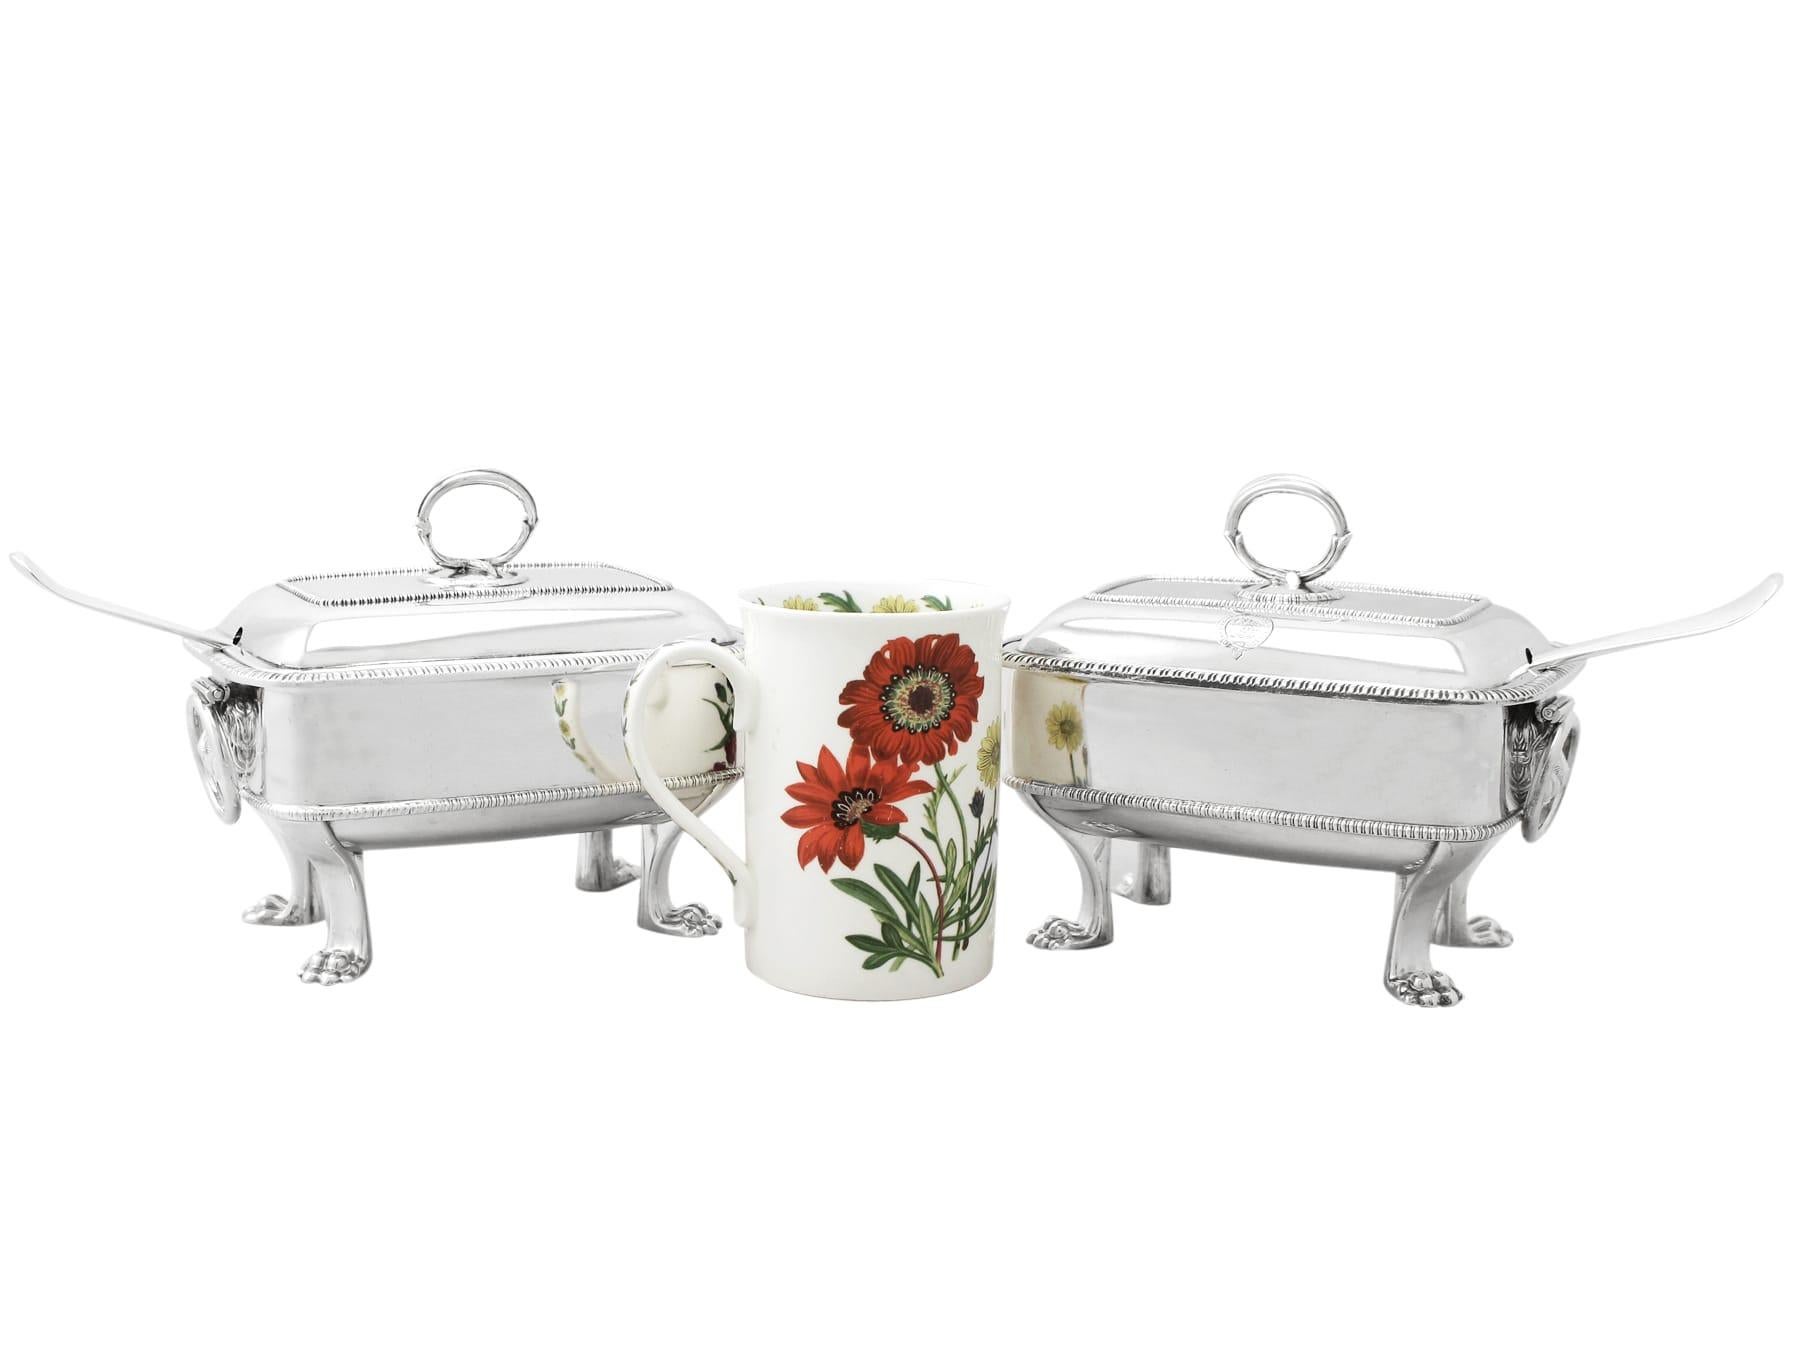 An exceptional, fine and impressive pair of antique George III English sterling silver sauce tureens with ladles; an addition to our Georgian silverware collection.

These exceptional antique George III sterling silver sauce tureens have a plain